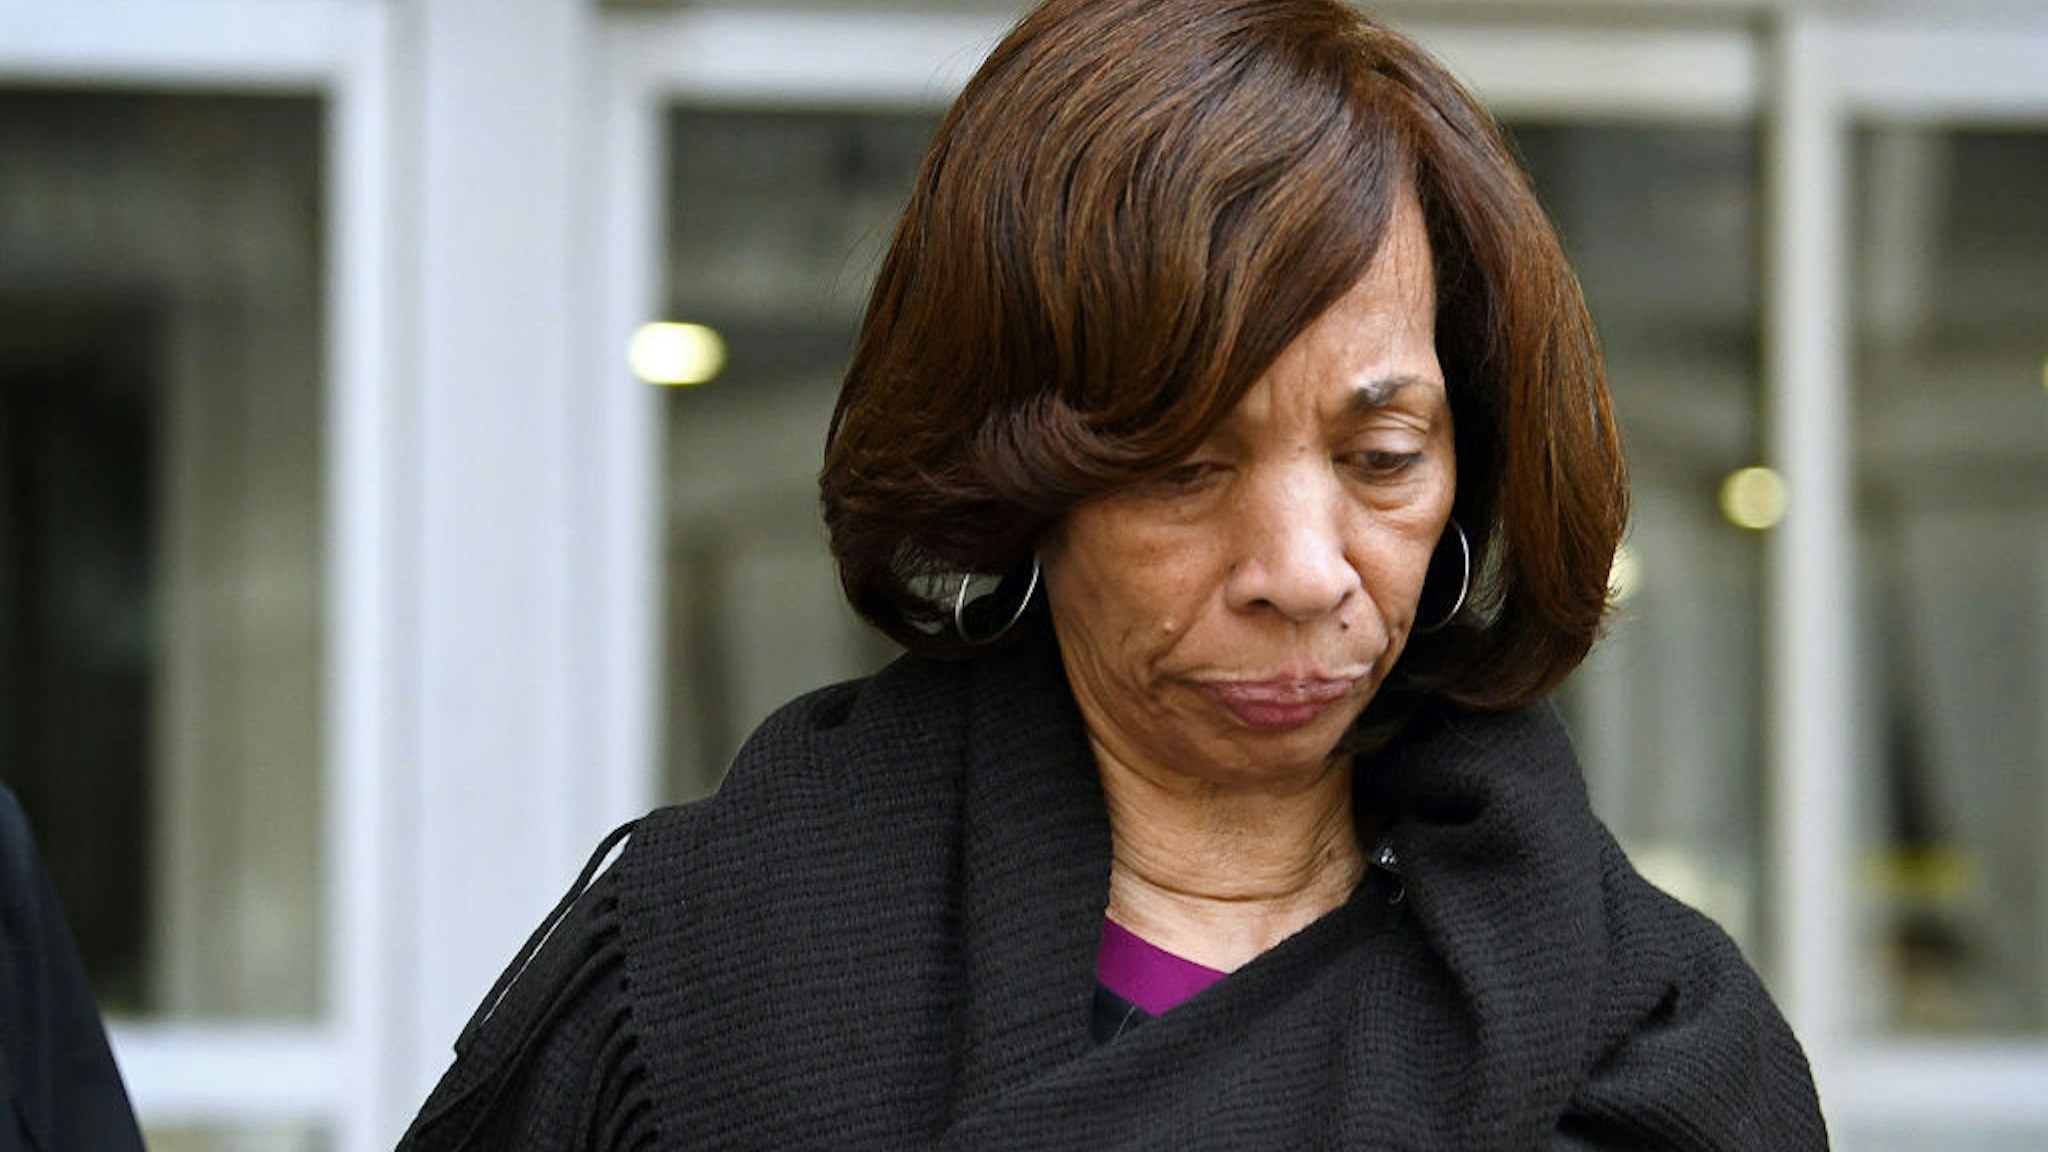 Former Baltimore mayor Catherine Pugh leaves the federal courthouse after pleading guilty to conspiracy and tax evasion related to her Healthy Holly books on Thursday, Nov. 21, 2019. (Jerry Jackson/Baltimore Sun/TNS)